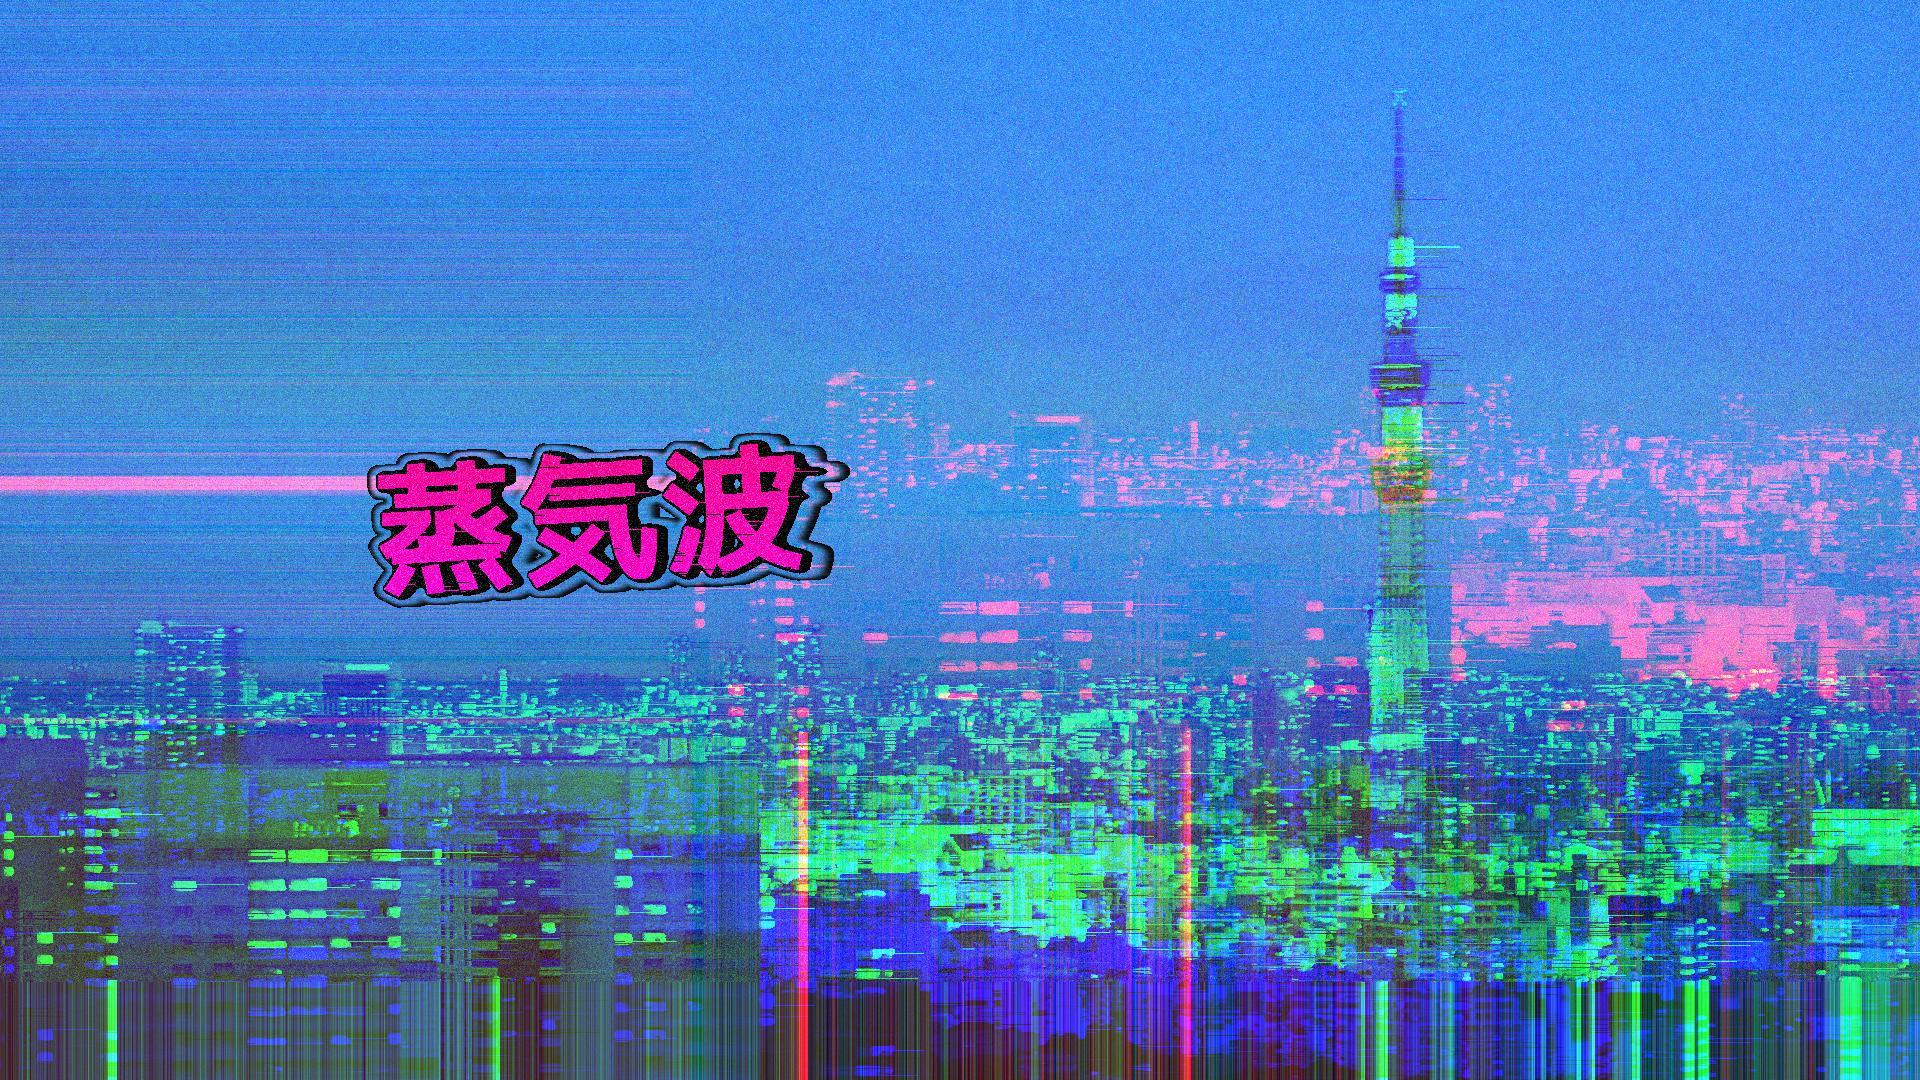 I Made A Wallpaper. Tell Me If The Japanese Text Says Vaporwave or